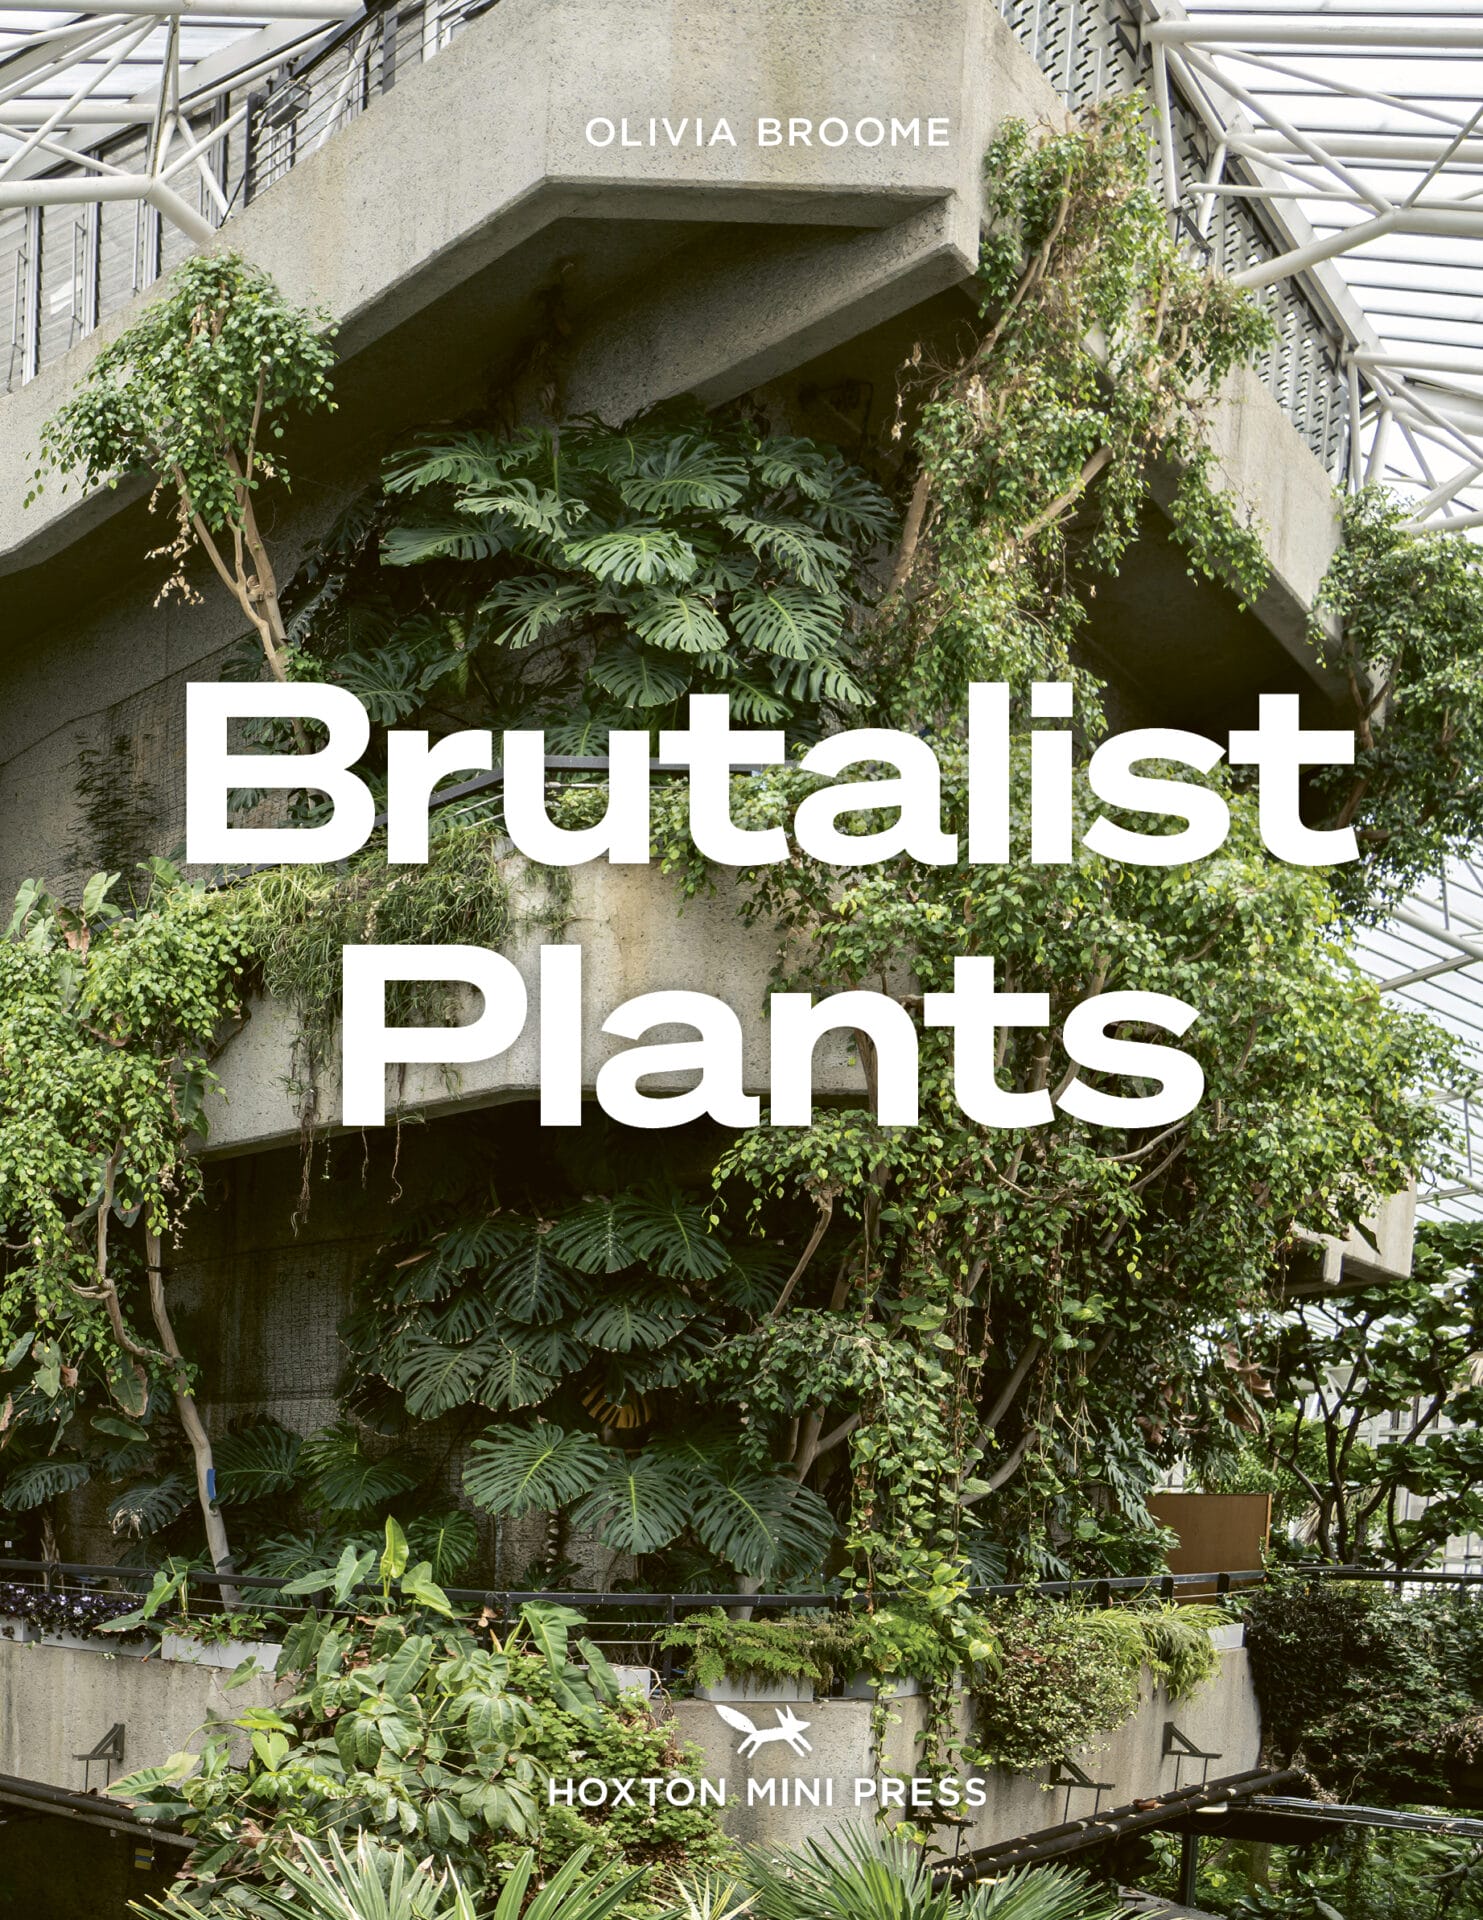 the front cover of the book 'Brutalist Plants' by Olivia Broome